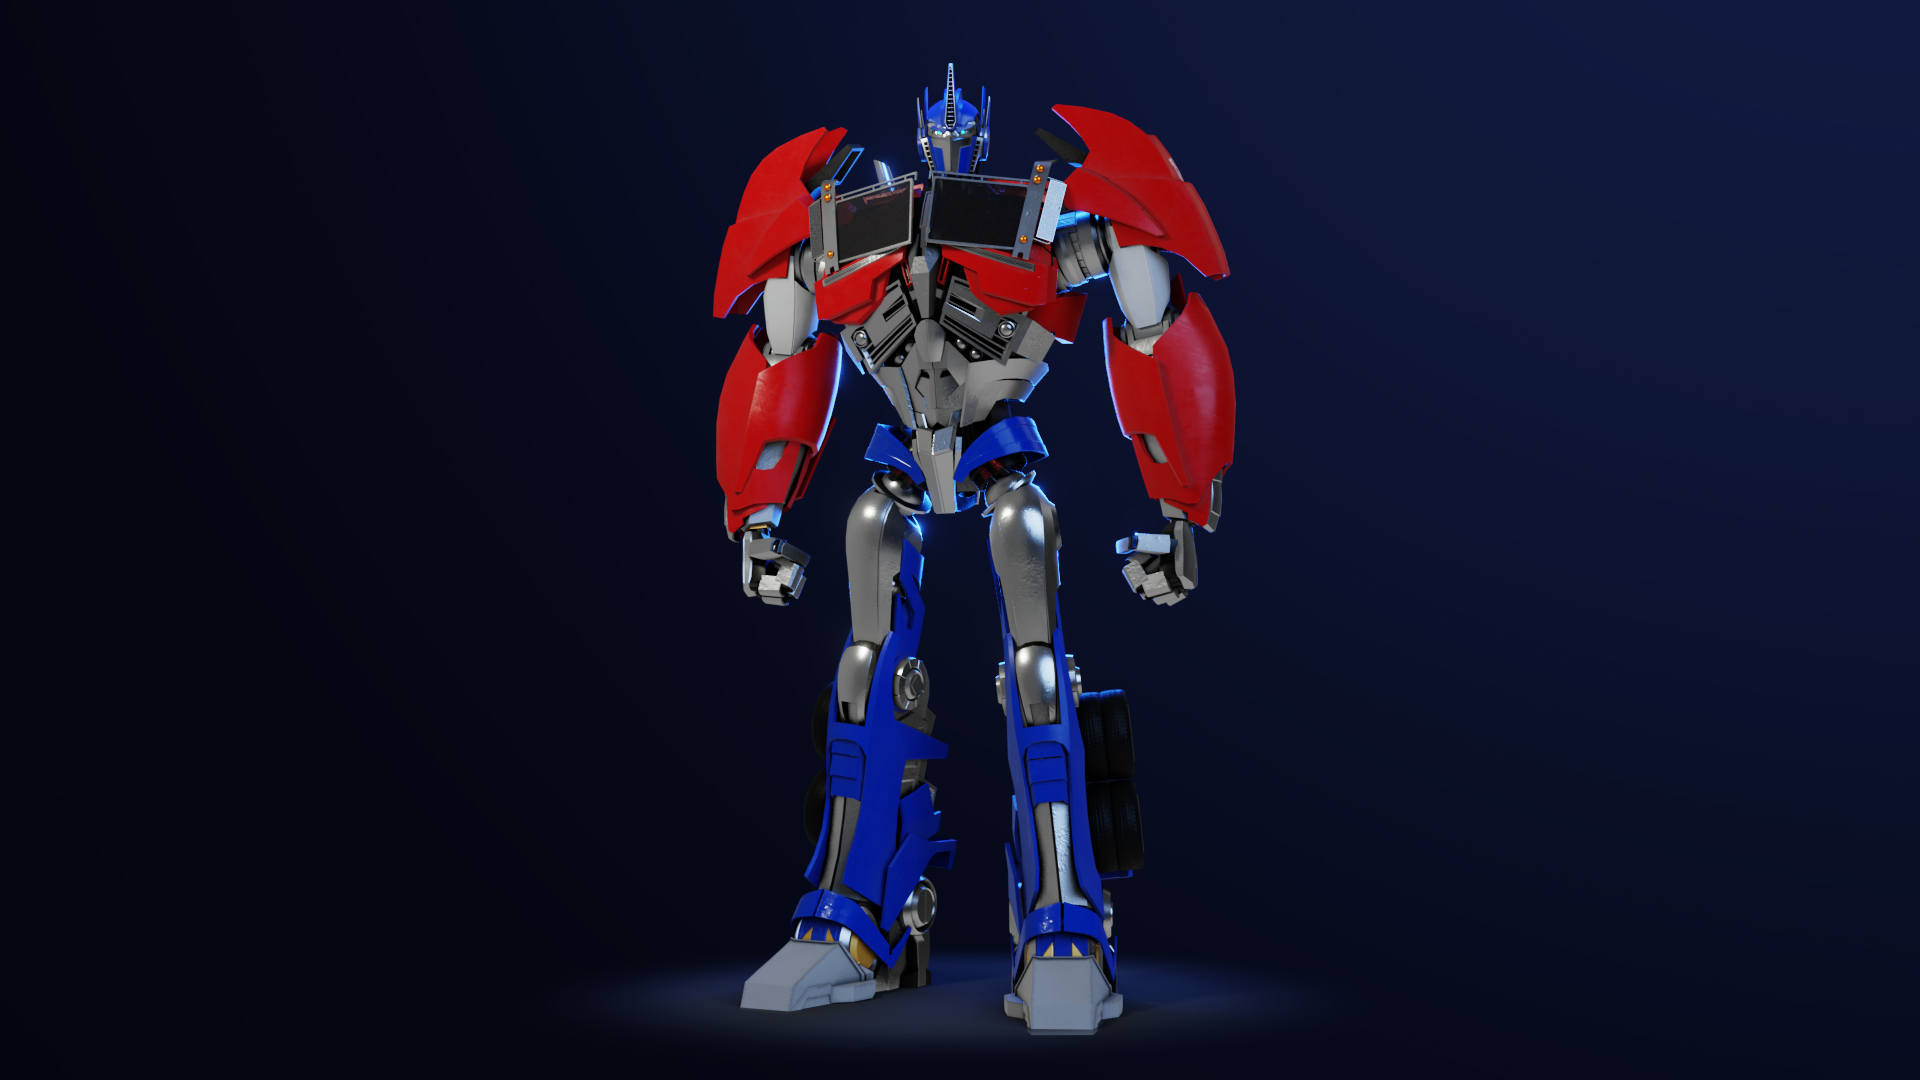 Optimus Prime - Transformers Prime - Download Free 3D model by